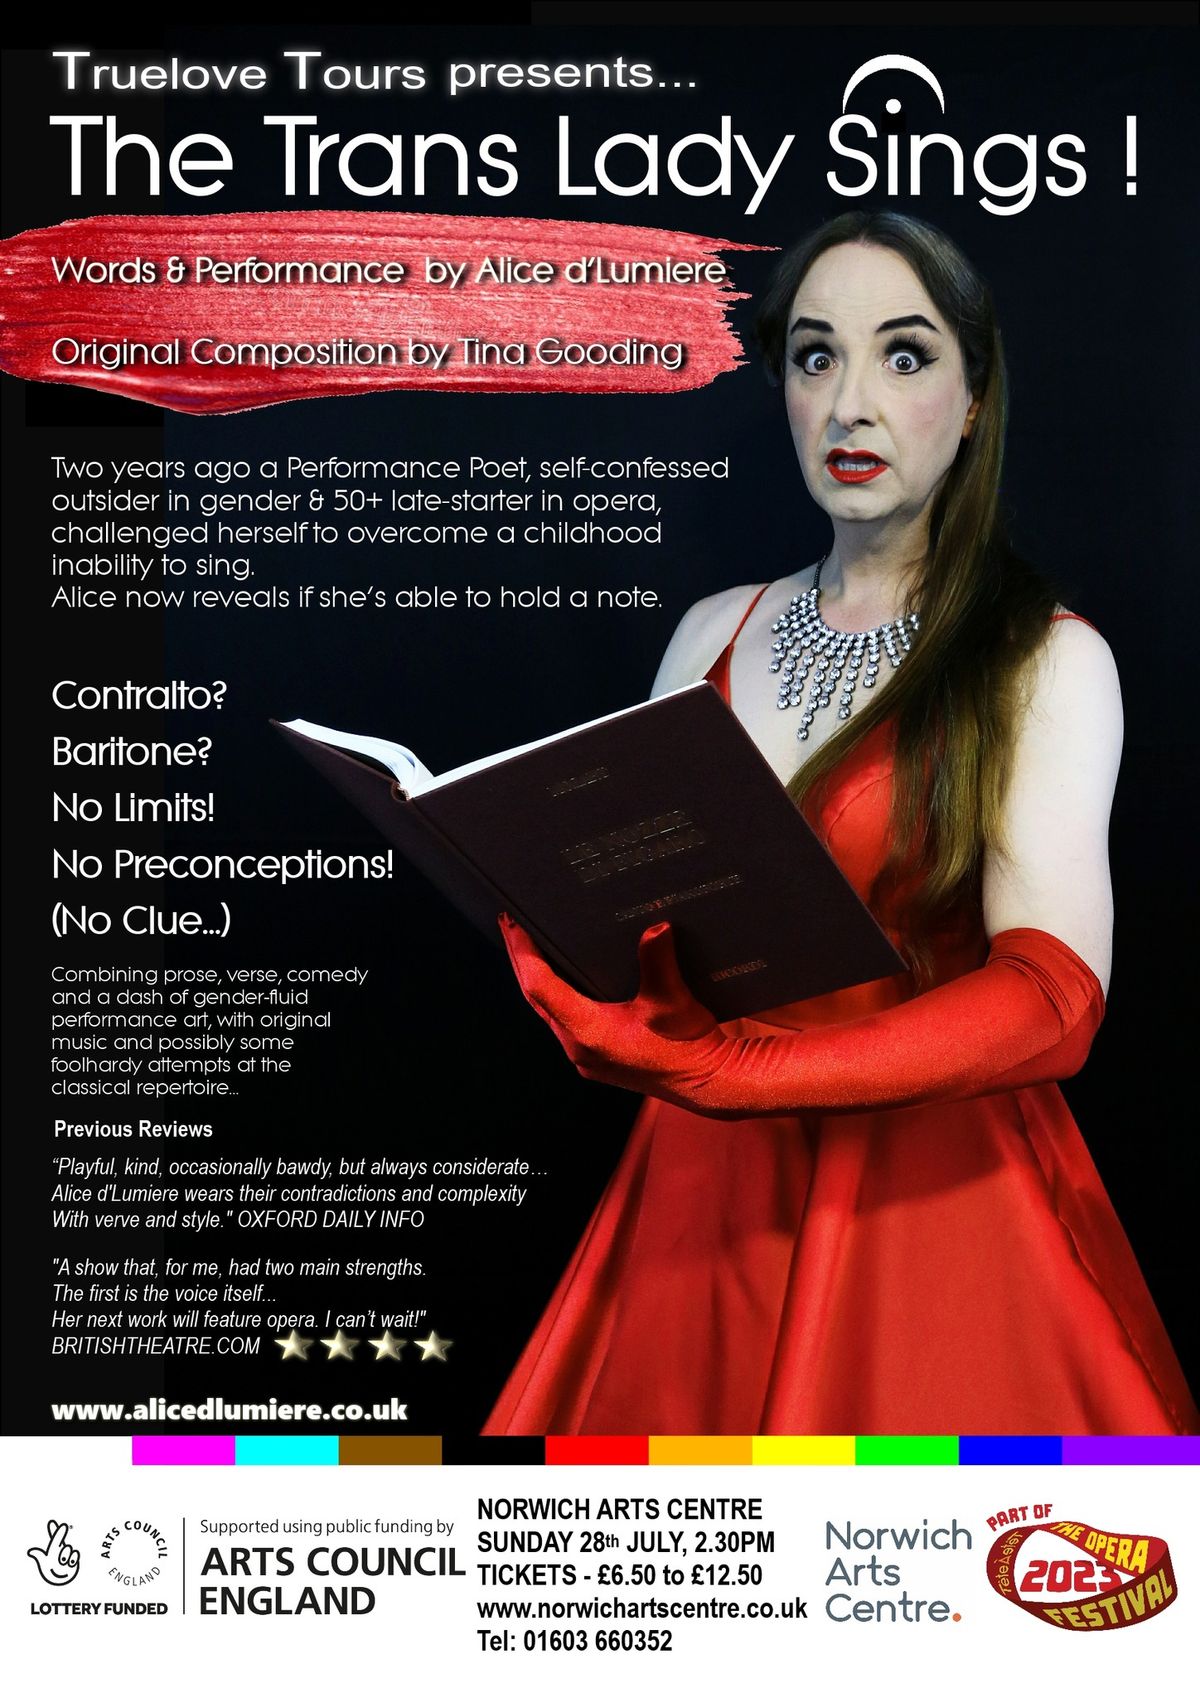 The Trans Lady Sings! at Norwich Arts Centre 